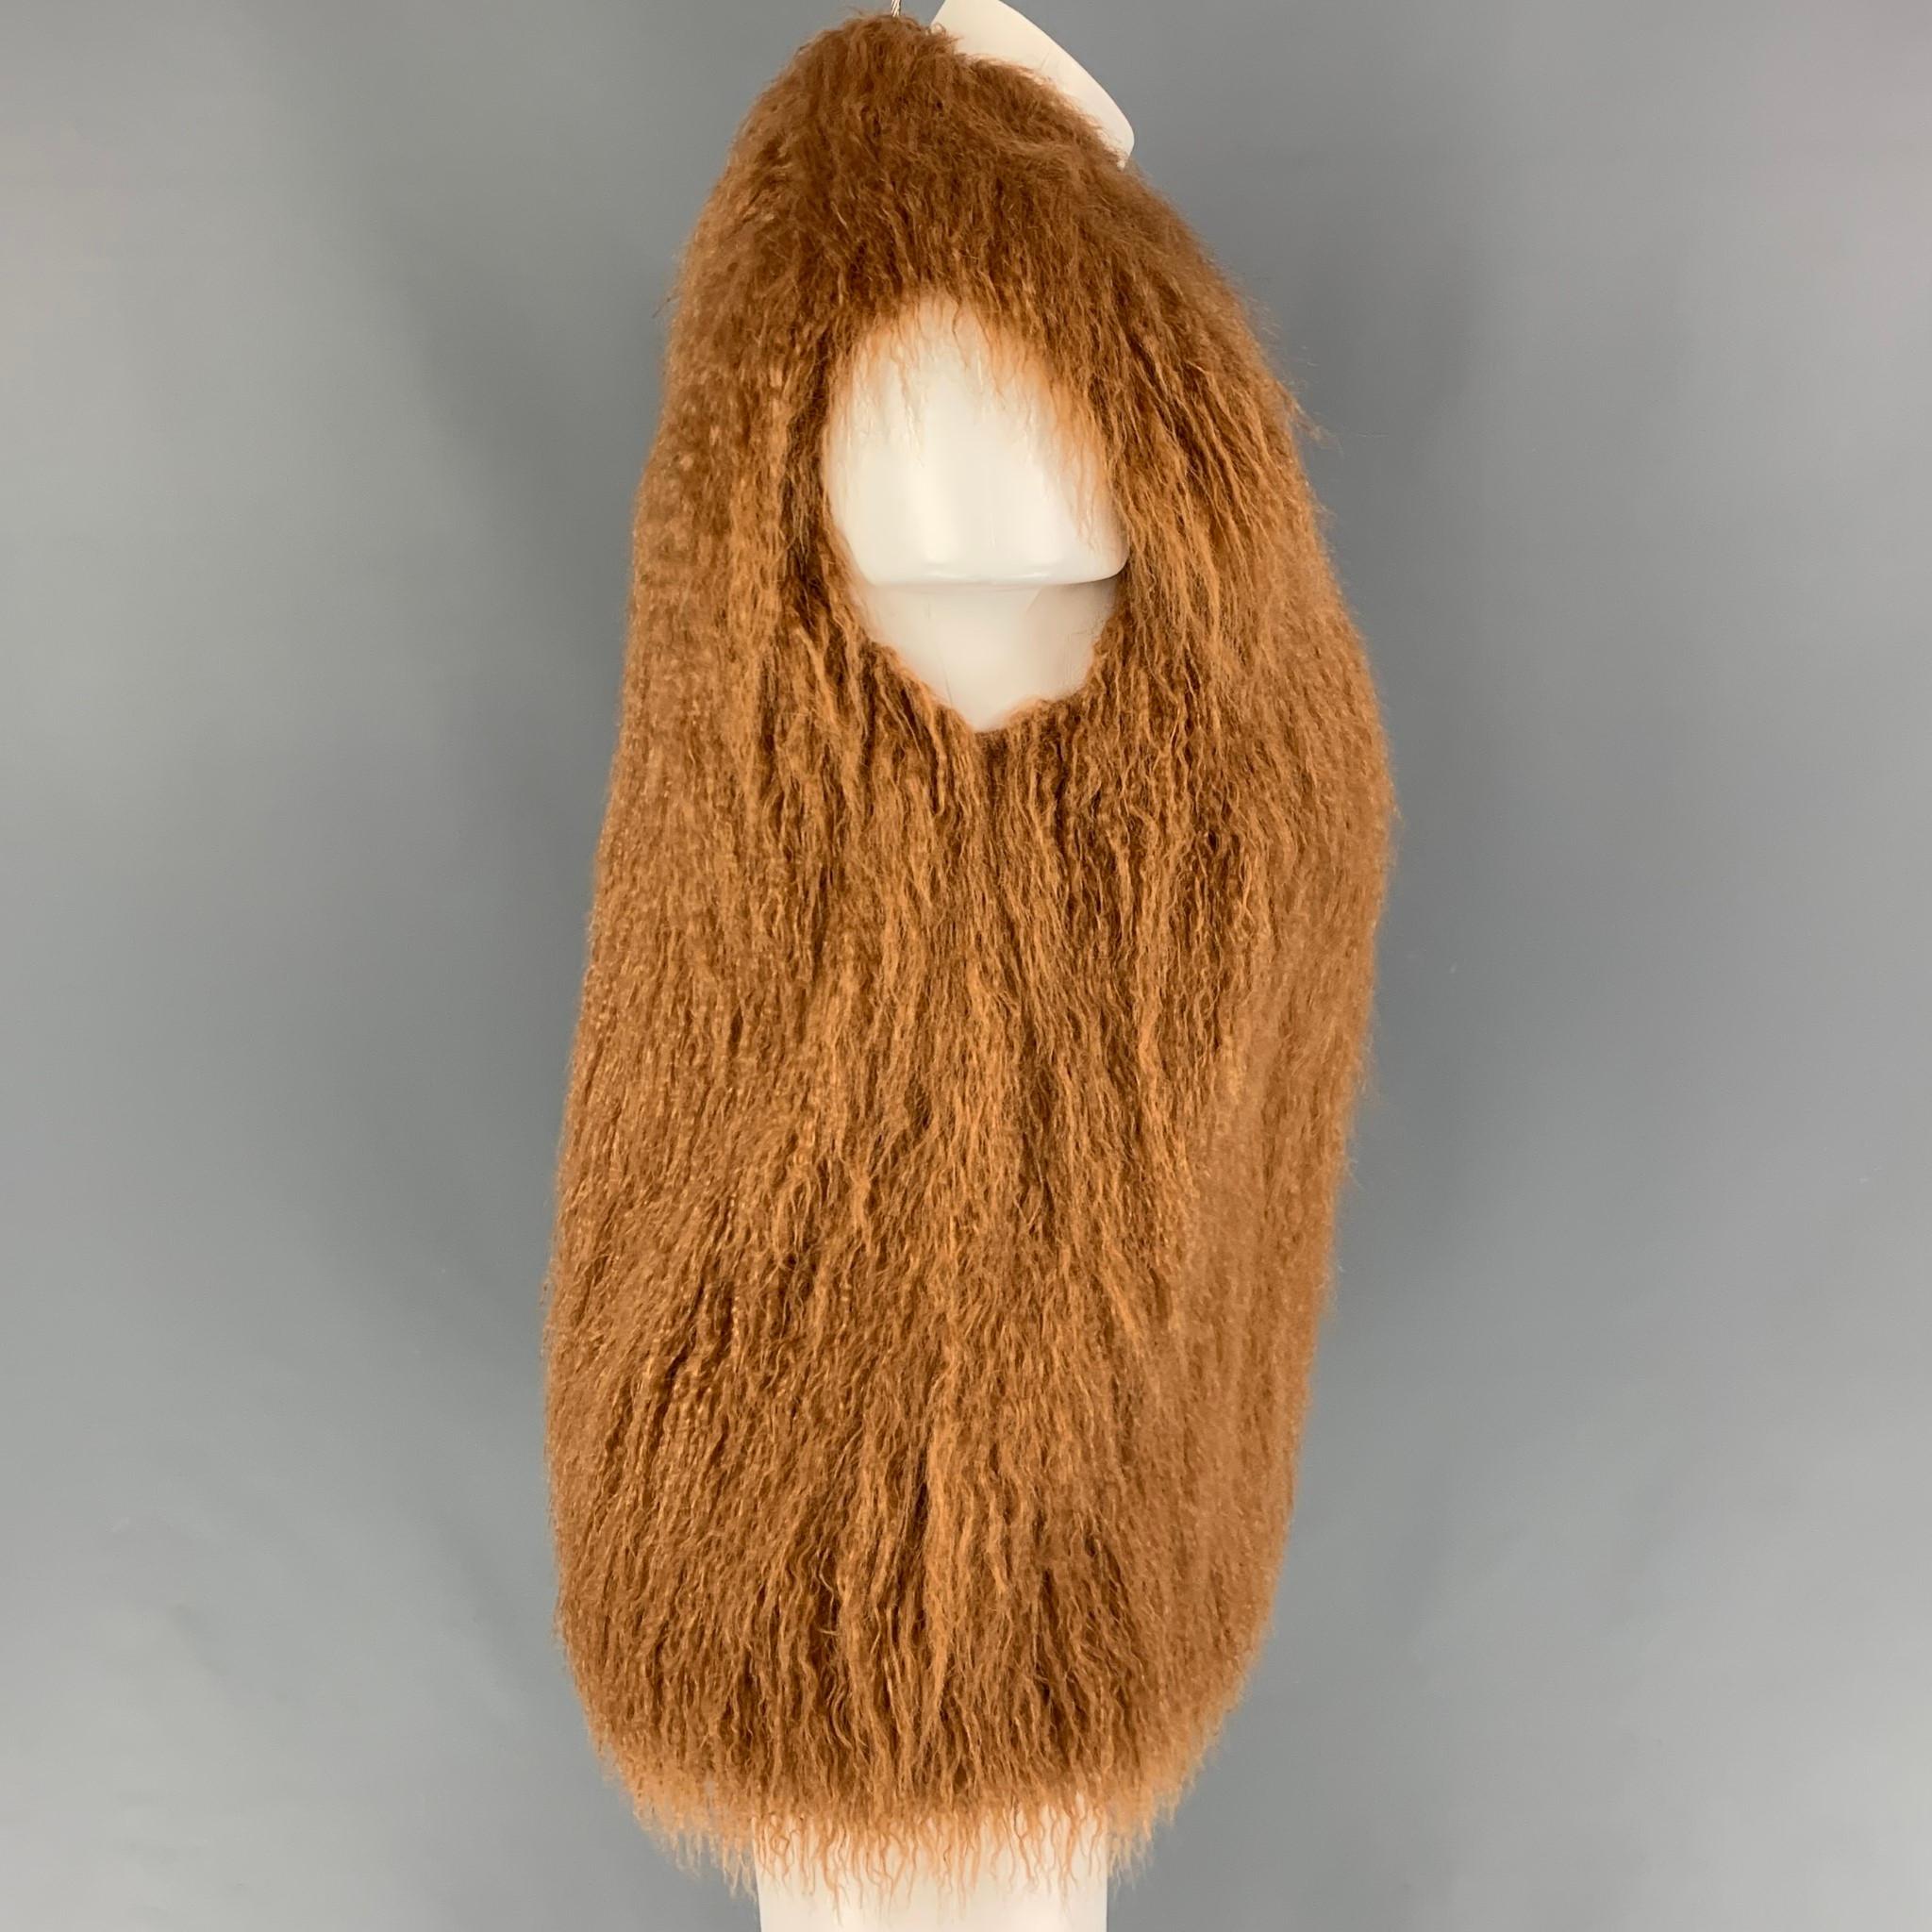 STELLA McCARTNEY 2015 'Fur Free Fur' vest comes in a brown faux fur with a full liner featuring a large collar, slit pockets, and a hook & loop closure. Made in Hungary.

Excellent Pre-Owned Condition.
Marked: 36
Original Retail Price: